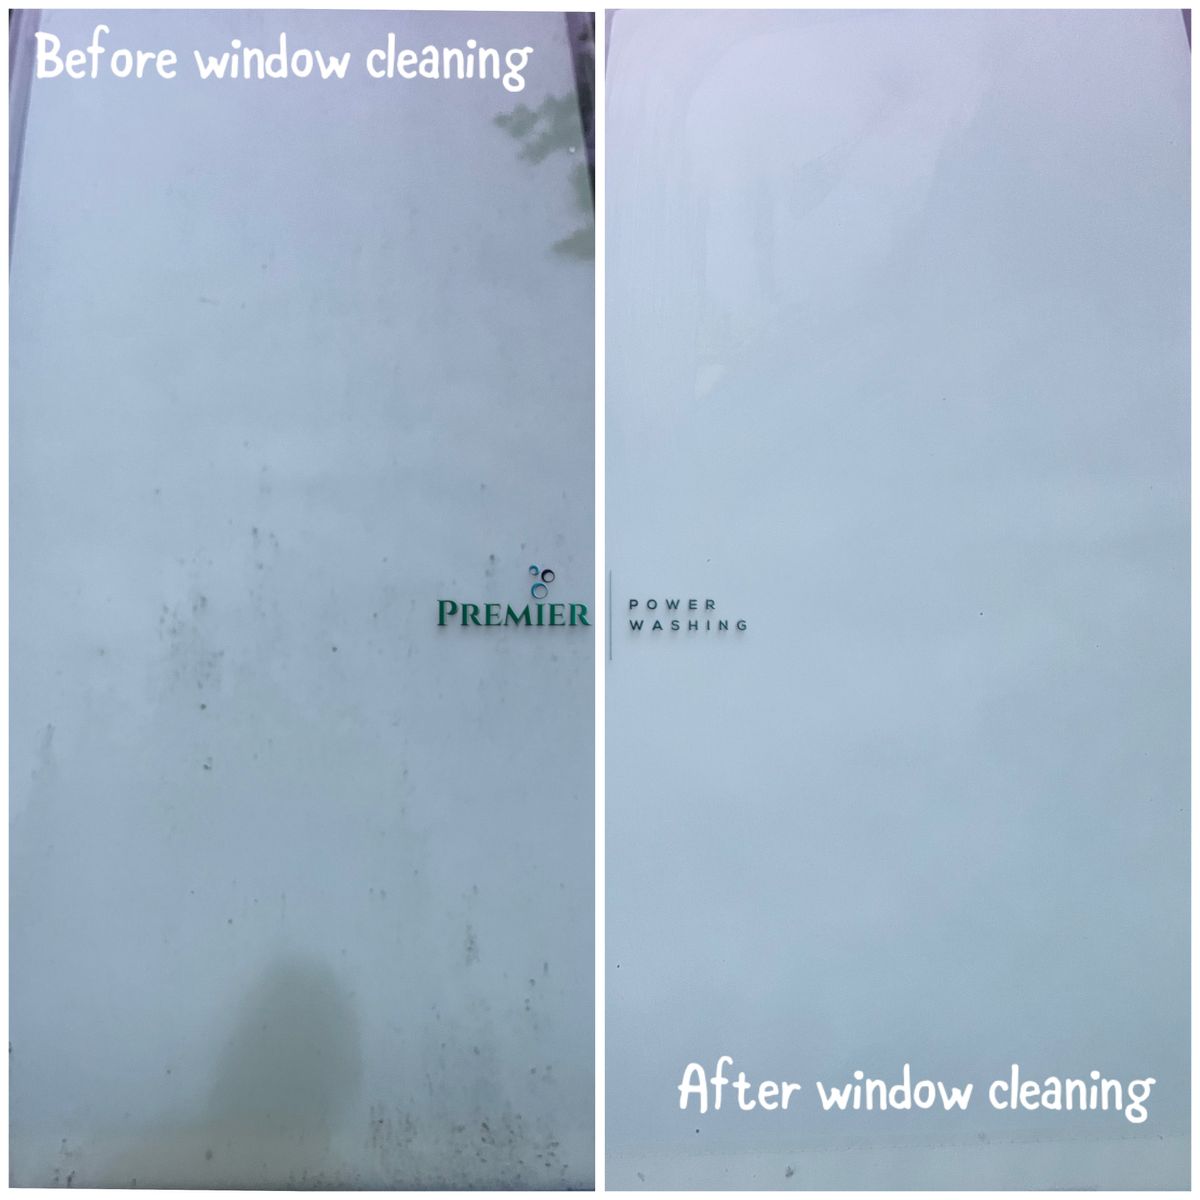 Window Cleaning for Premier Partners, LLC. in Volo, IL